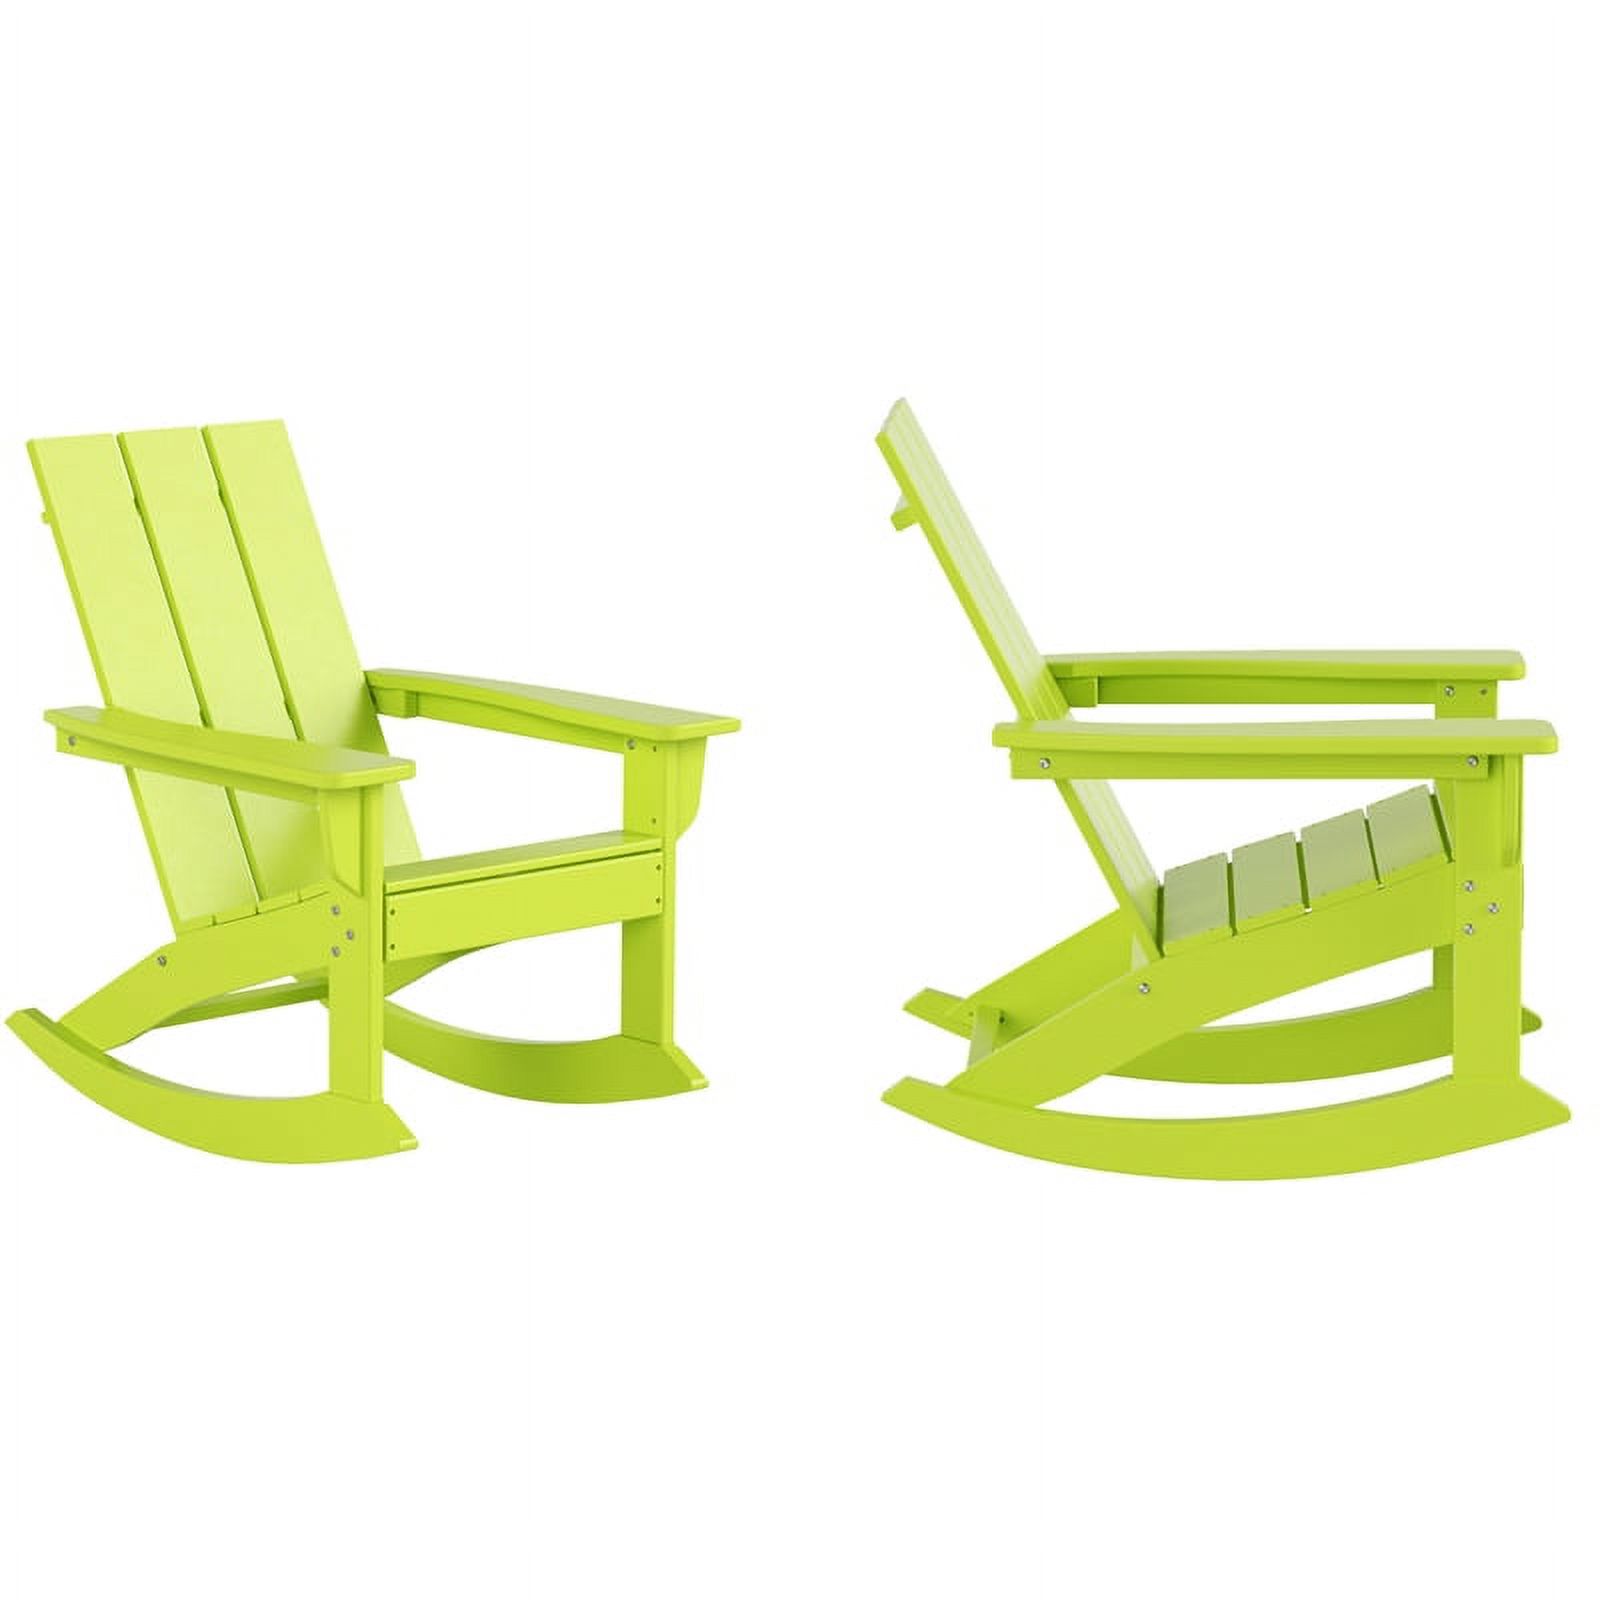 Costaelm Palms Outdoor HDPE Plastic Adirondack Rocking Chair (Set of 2), Lime - image 3 of 8